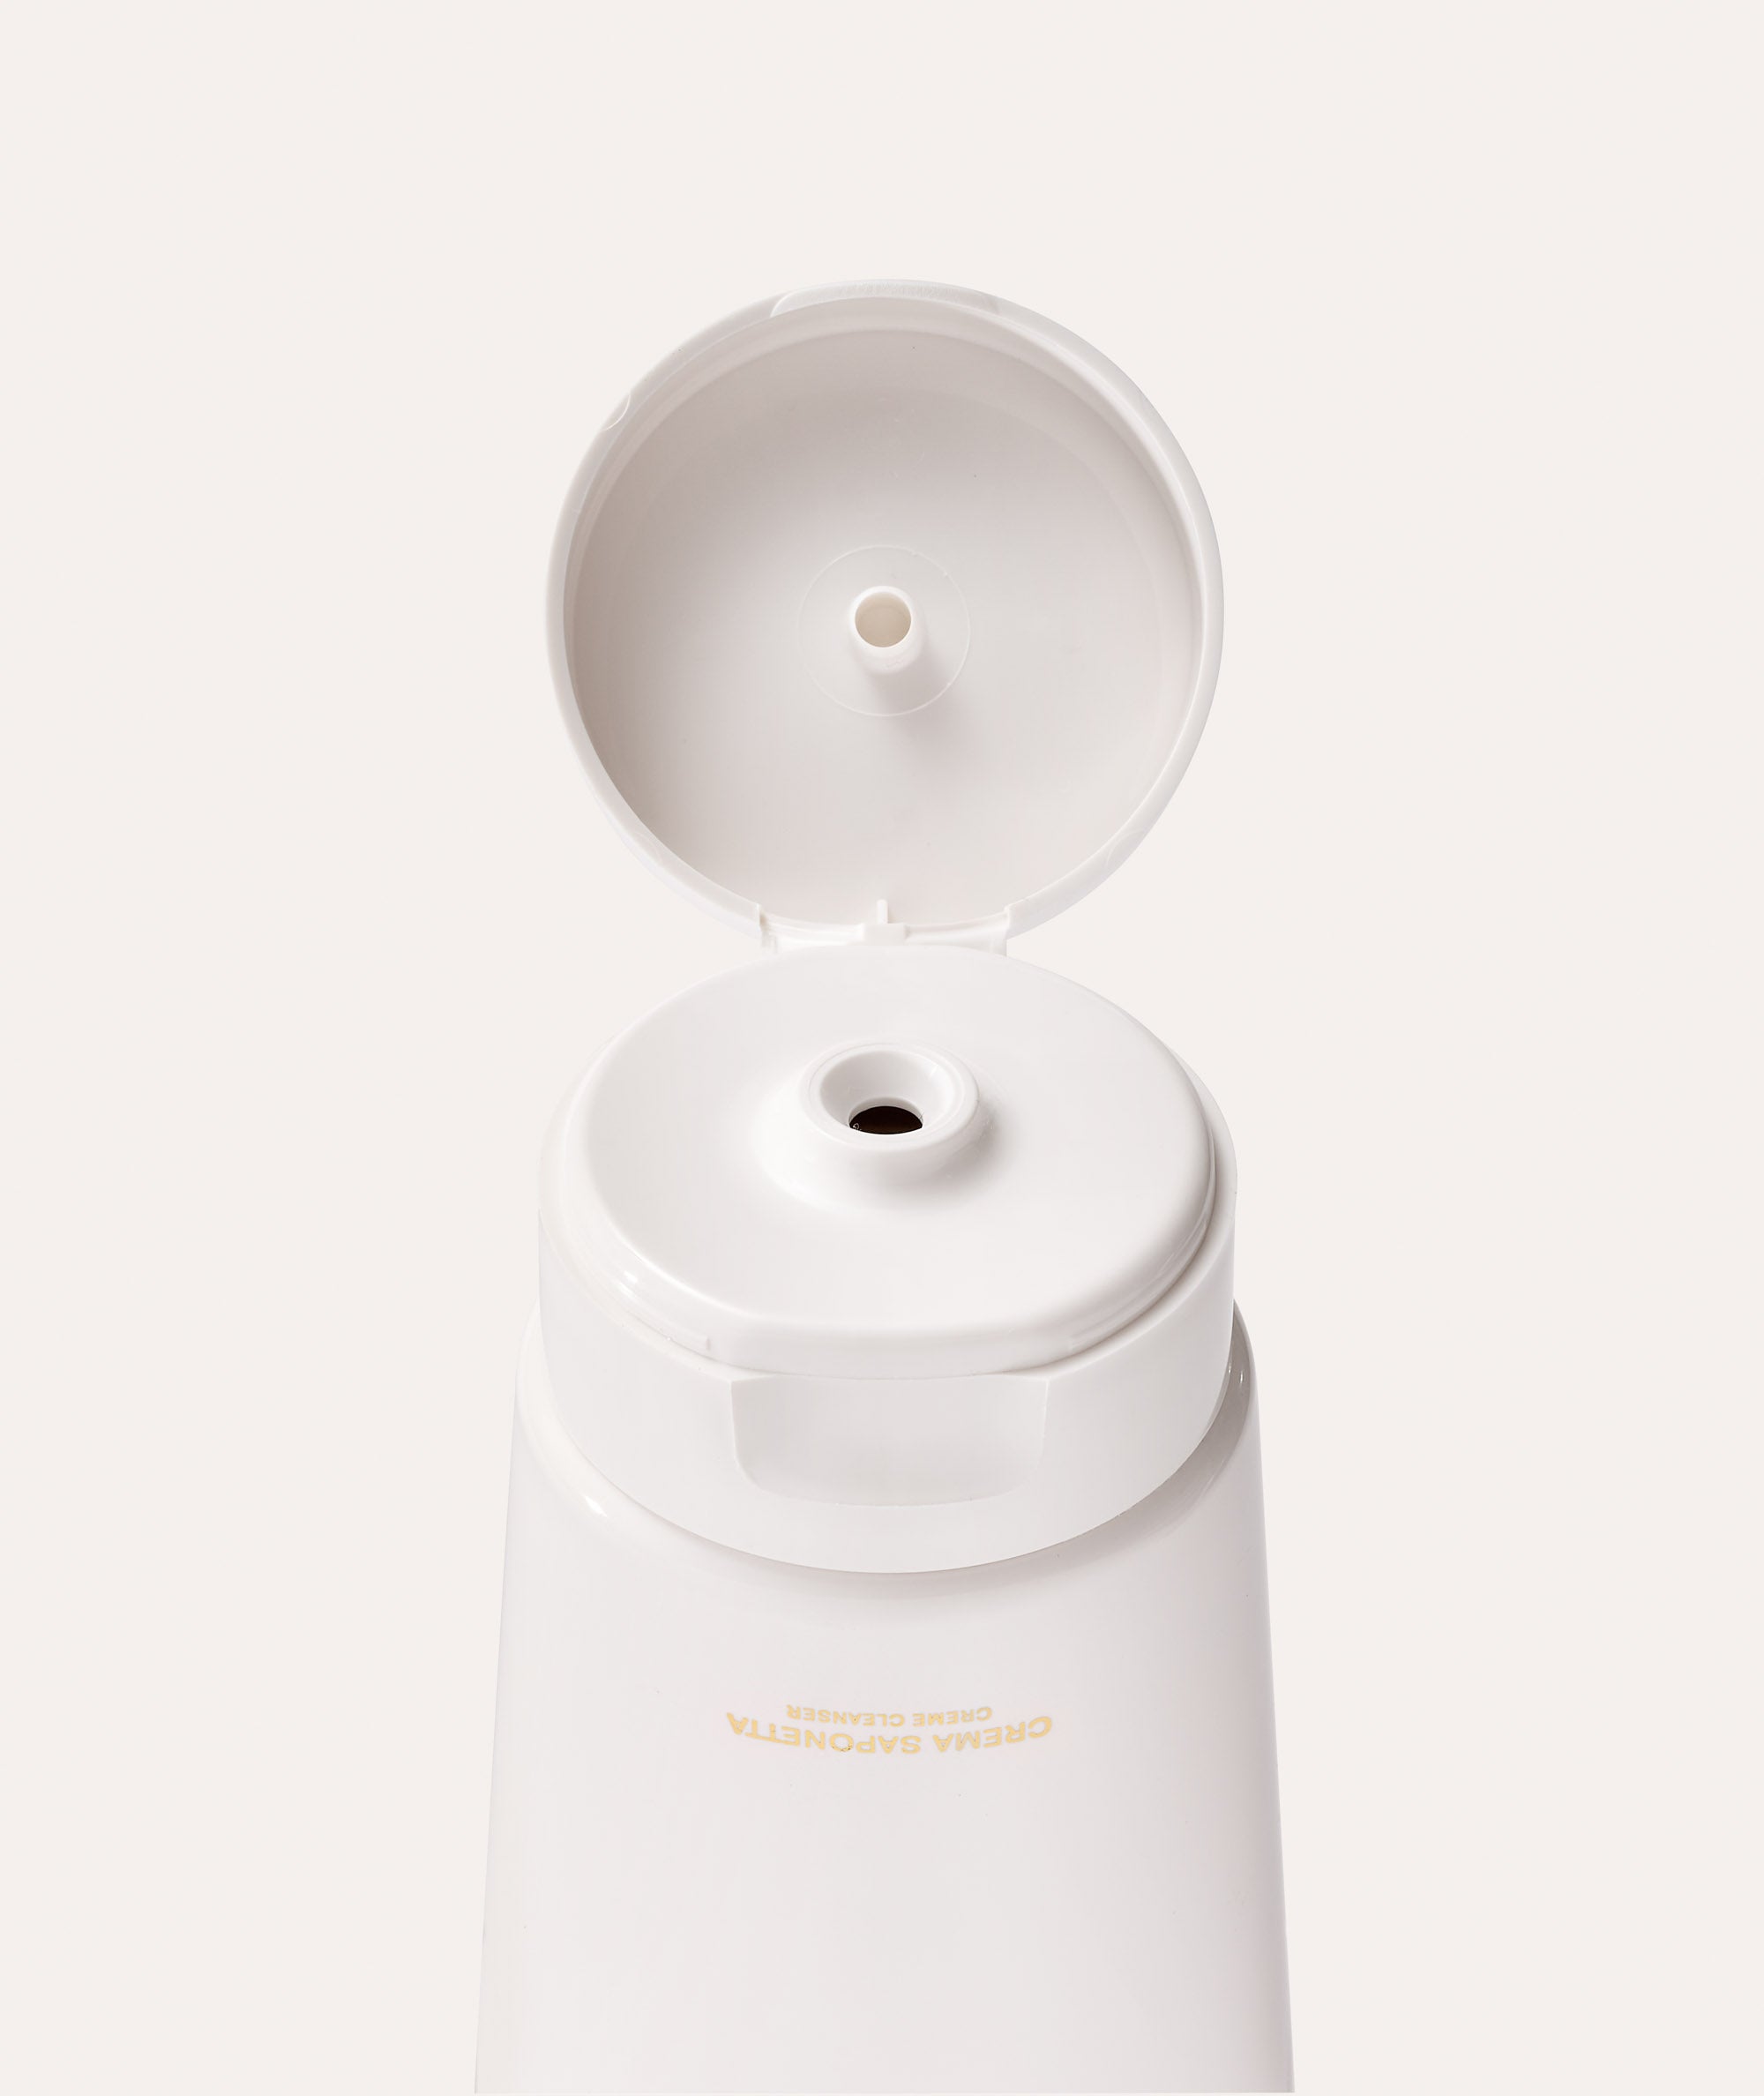 This is a picture of Borghese Crema Saponetta Creme Cleanser dispenser & cap